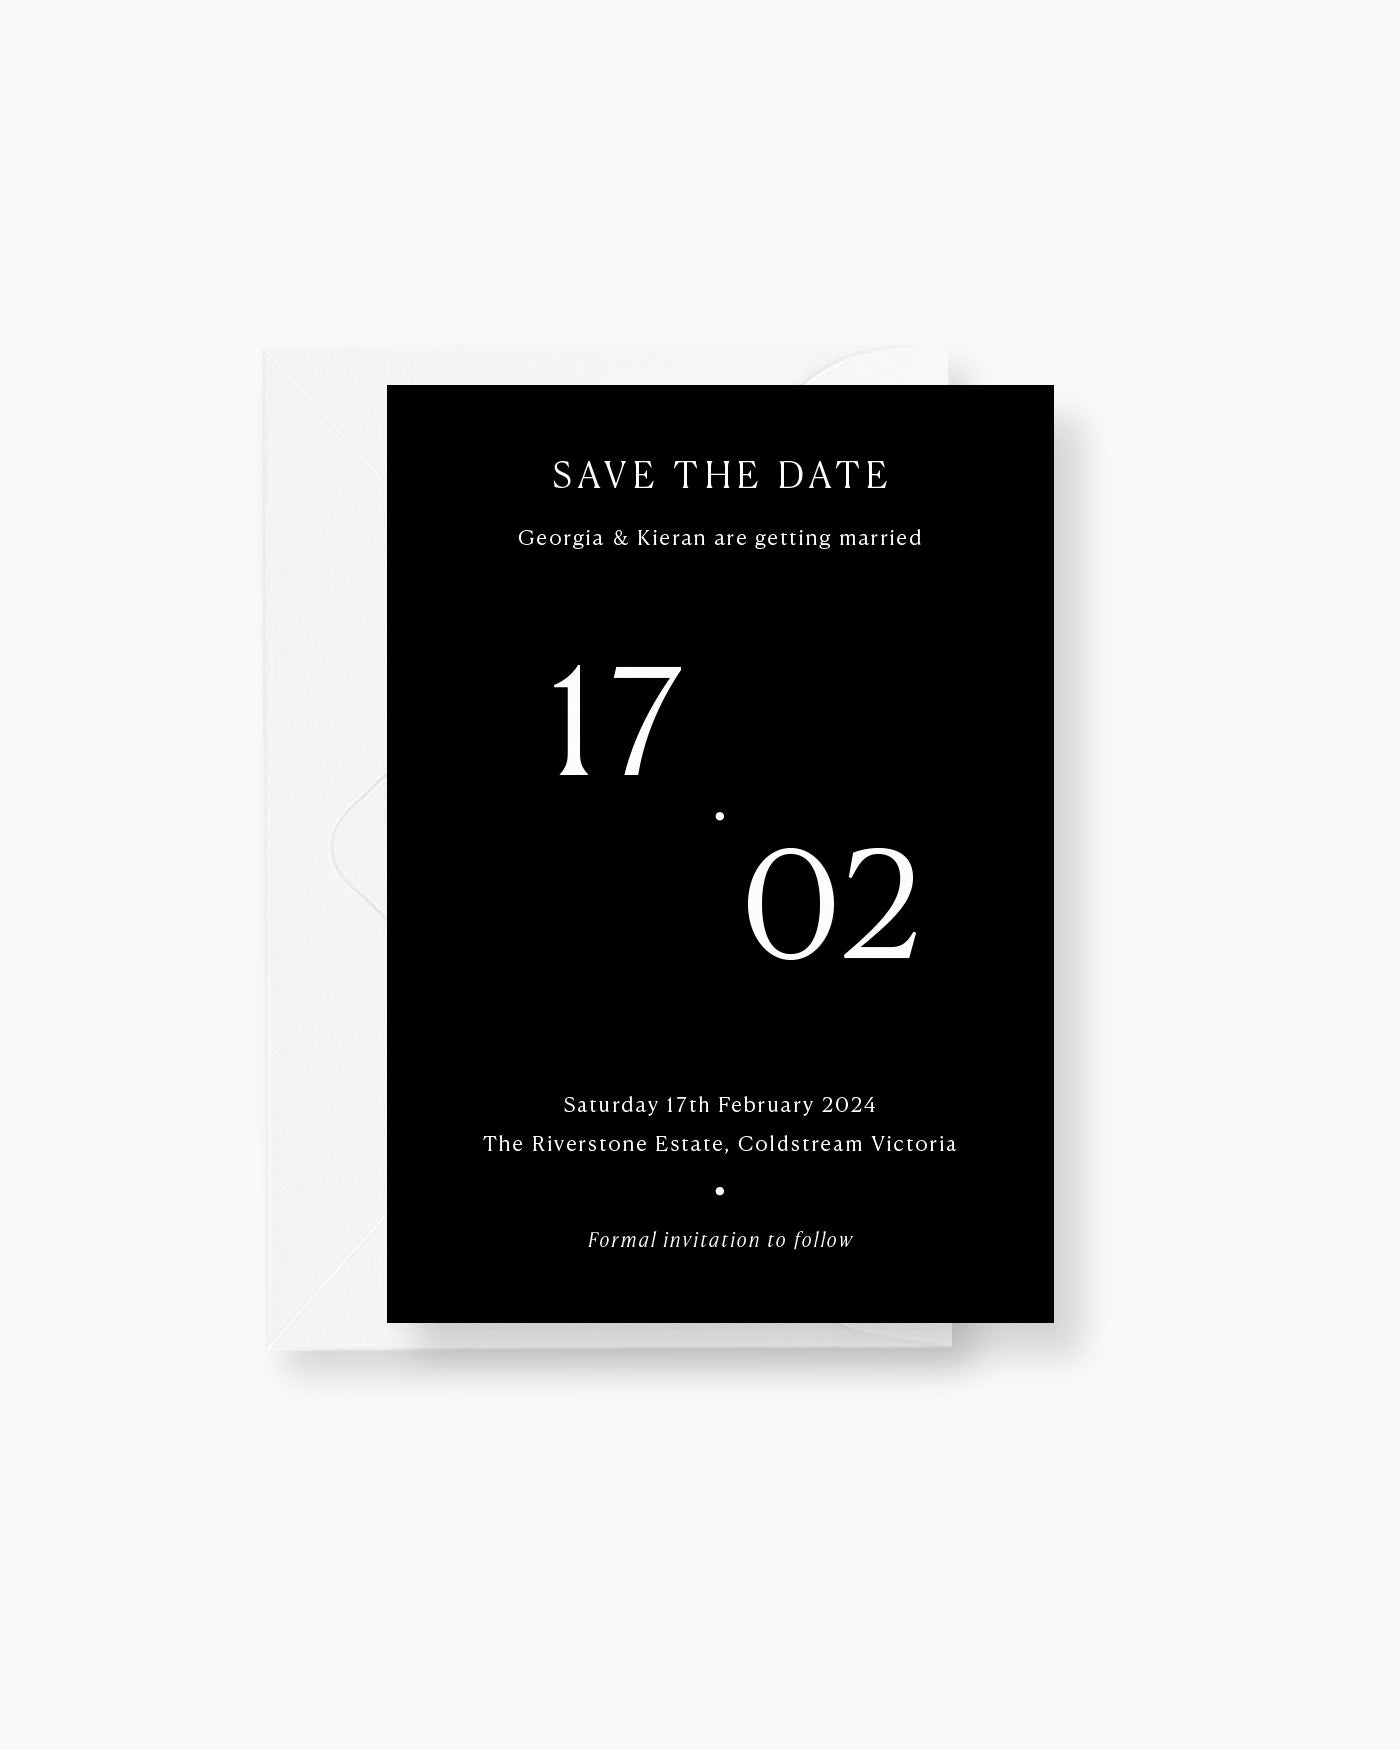 Peppermint Press Stationery Suite Georgia Save the Date